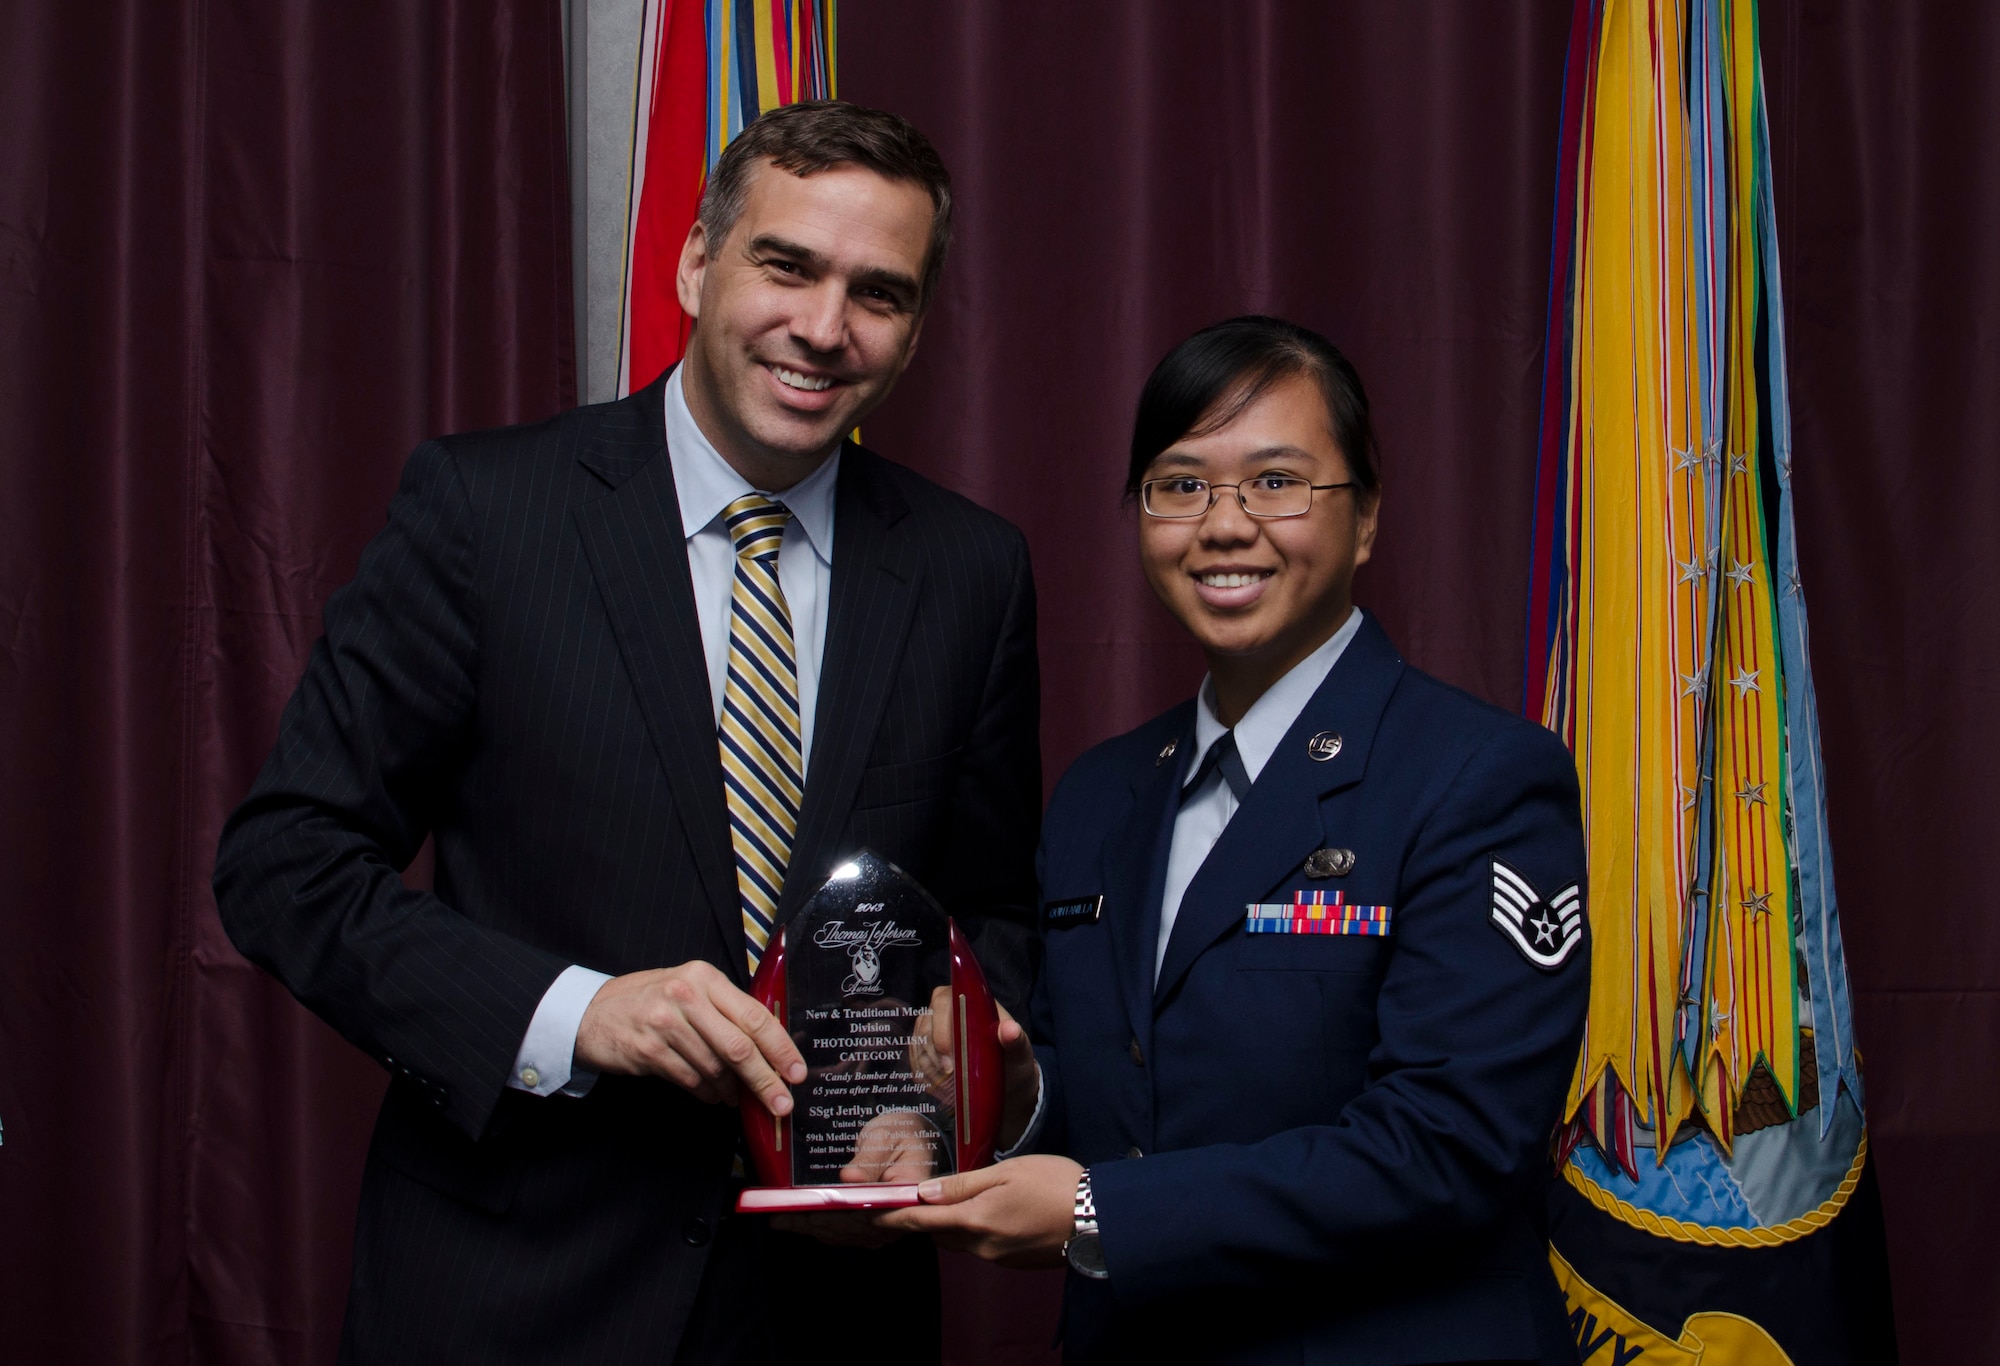 Staff Sgt. Jerilyn Quintanilla, 59th Medical Wing Public Affairs at JBSA-Lackland, Texas, receives the Thomas Jefferson Award (photojournalism category) from Brent Colburn, Assistant to the Secretary of Defense for Public Affairs, during an award ceremony at the Defense Information School, Fort George G. Meade, Maryland May 9, 2014. Quintanilla won for her combined skills in writing and photography, which she used to tell the story about the “Candy Bomber” and his reenactment of delivering candy to children during the Berlin Airlift campaign. (Courtesy photo) 
